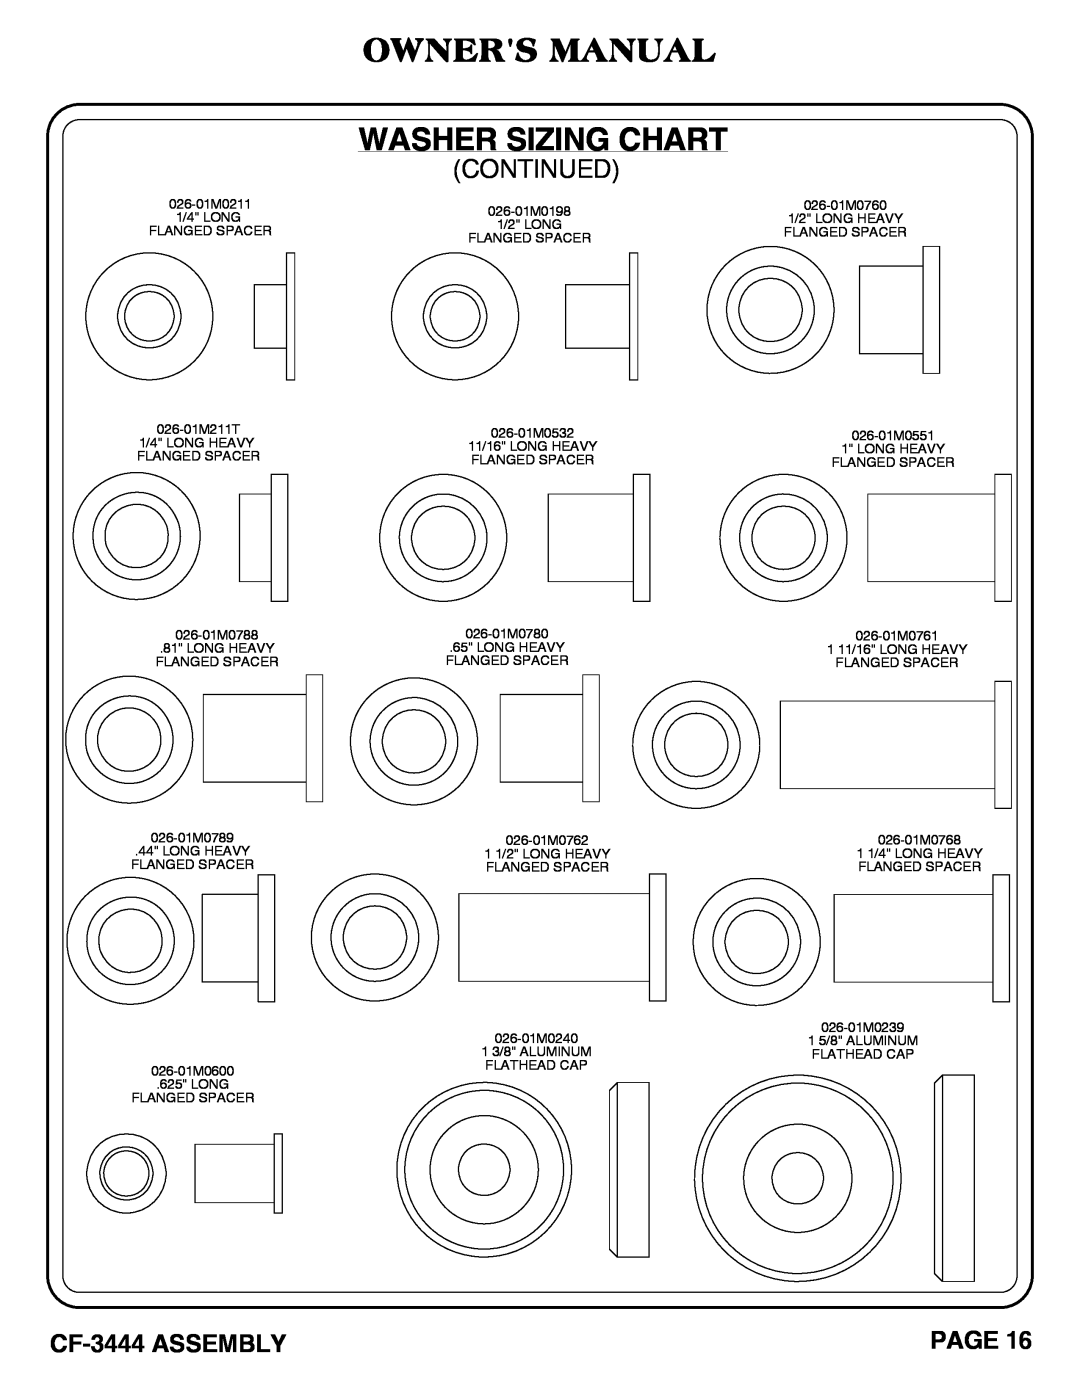 Hoist Fitness cf-3444 owner manual Owners Manual Washer Sizing Chart, Page, 026-01M0211 1/4 LONG FLANGED SPACER 